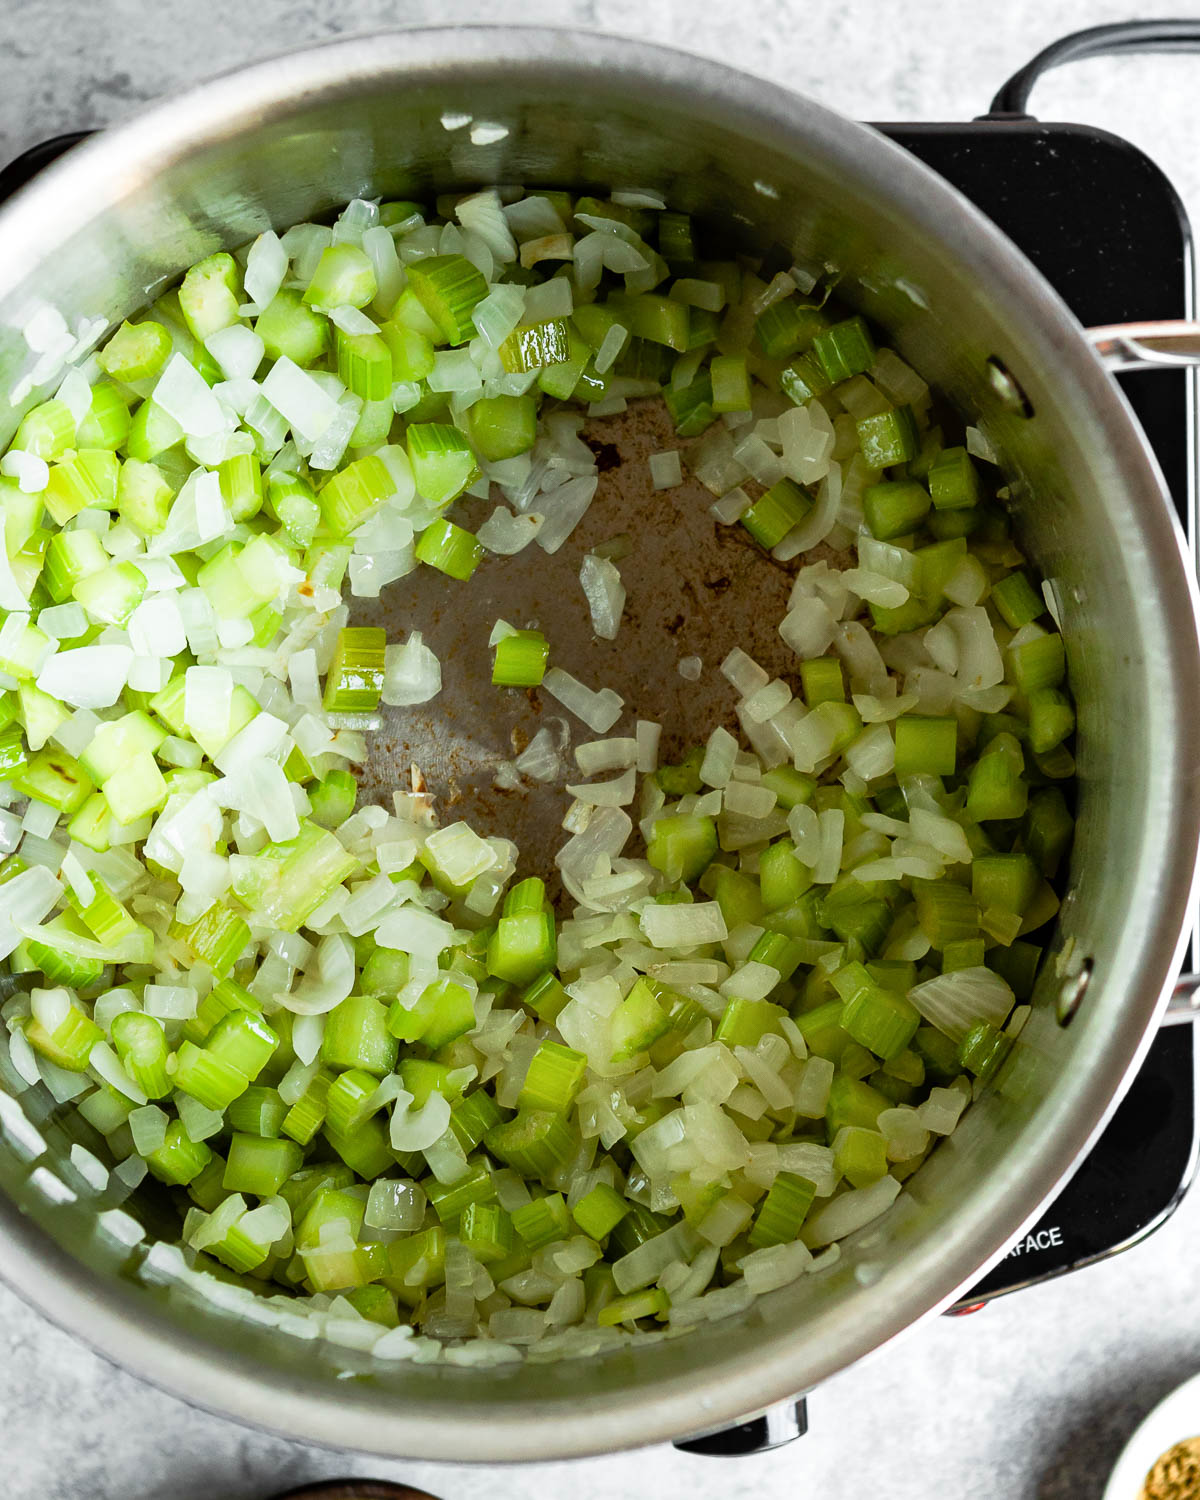 Sautéing onion and celery in a pot